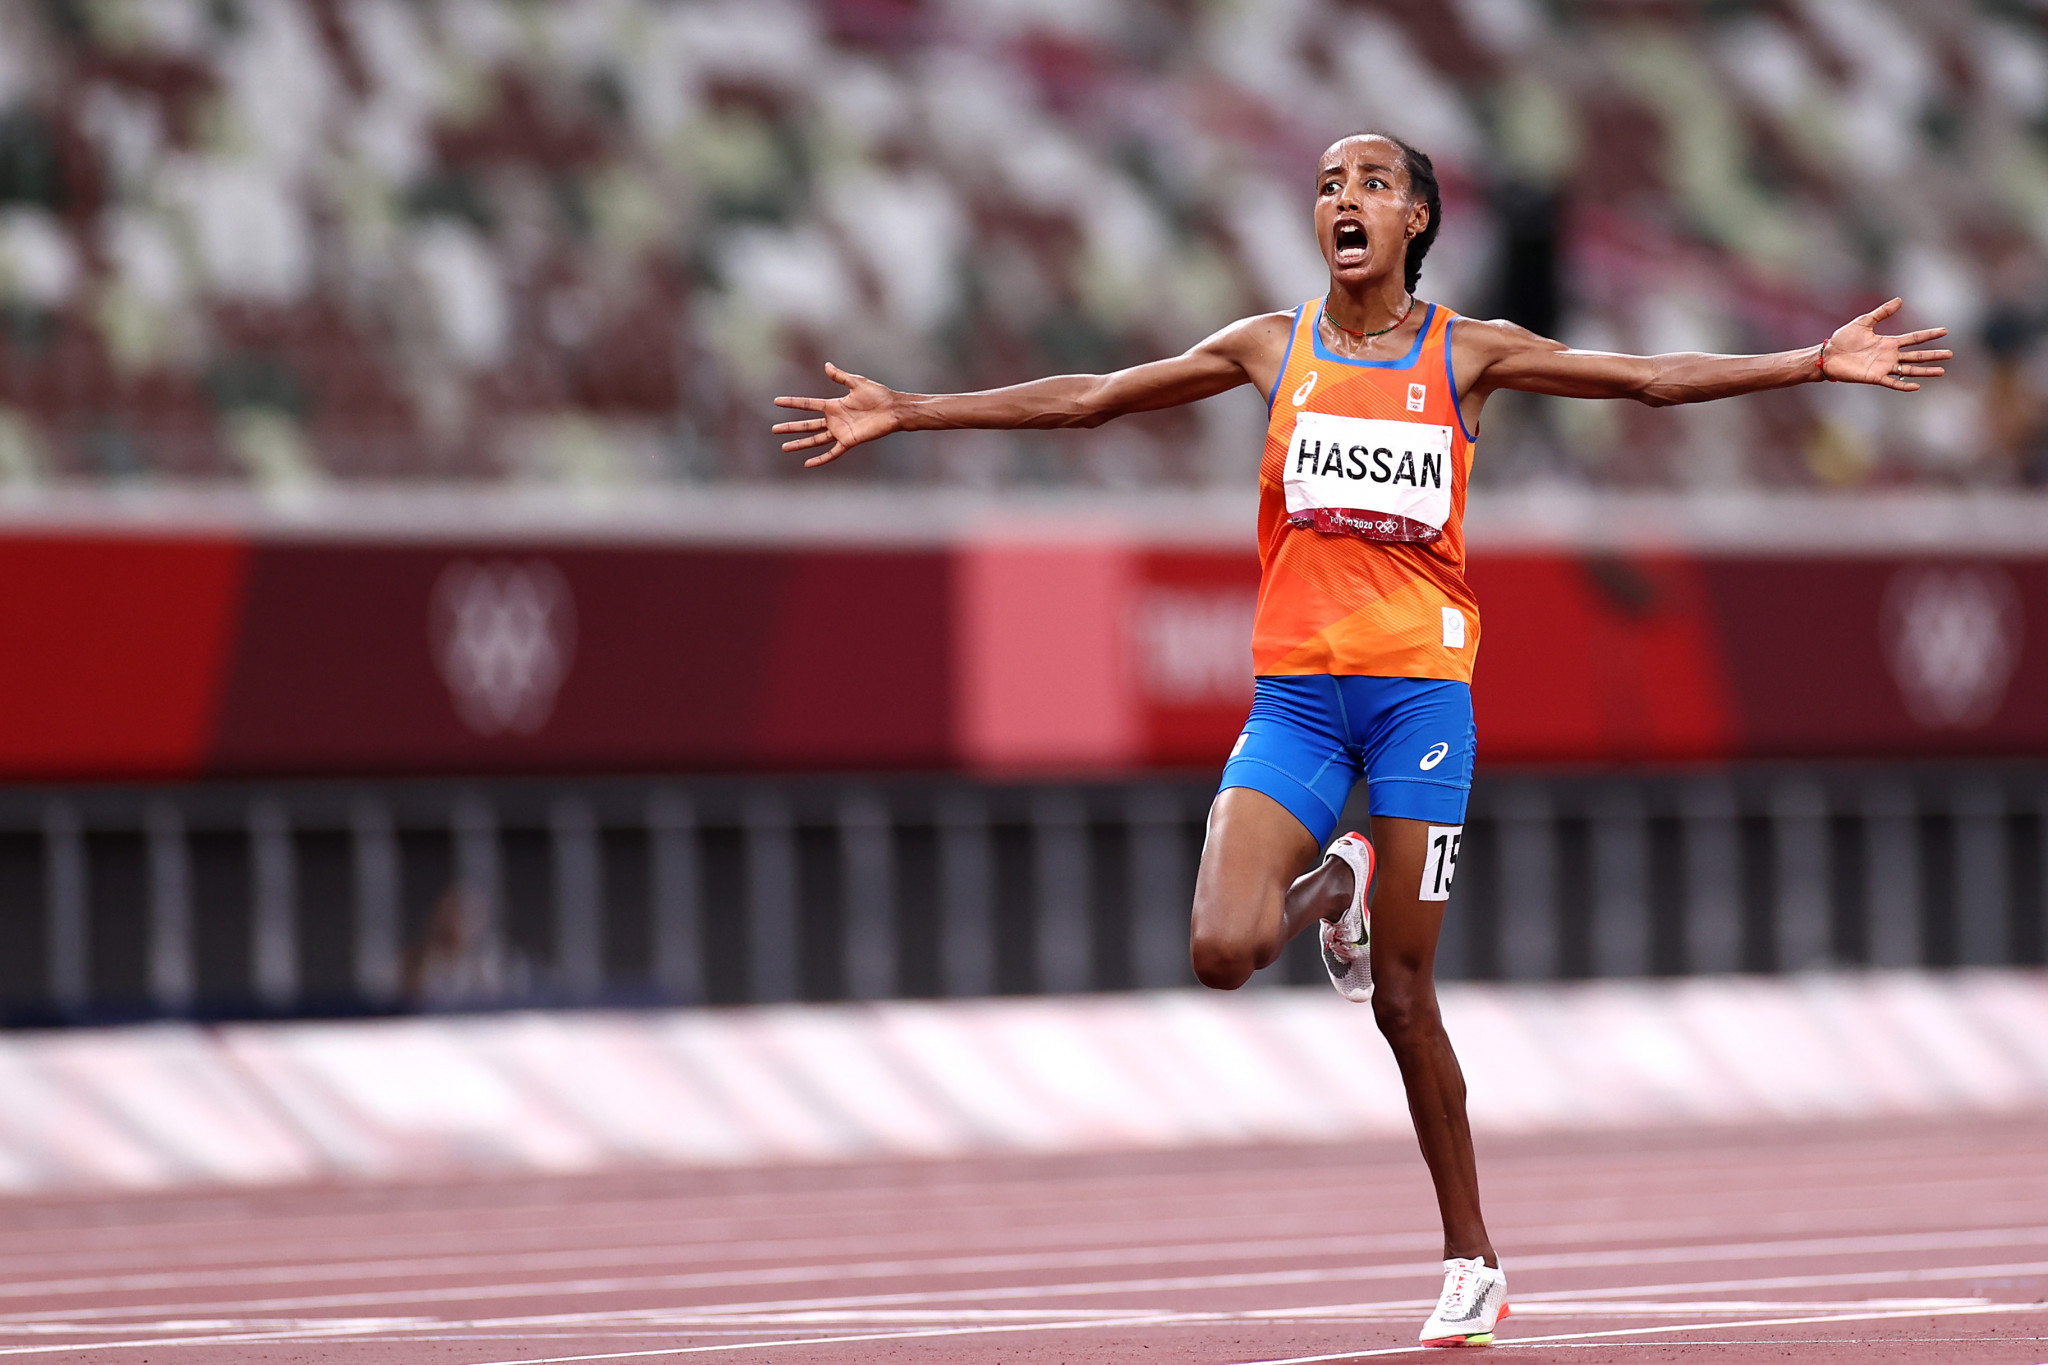 Sifan Hassan was named Women's Athlete of the Year ©Getty Images